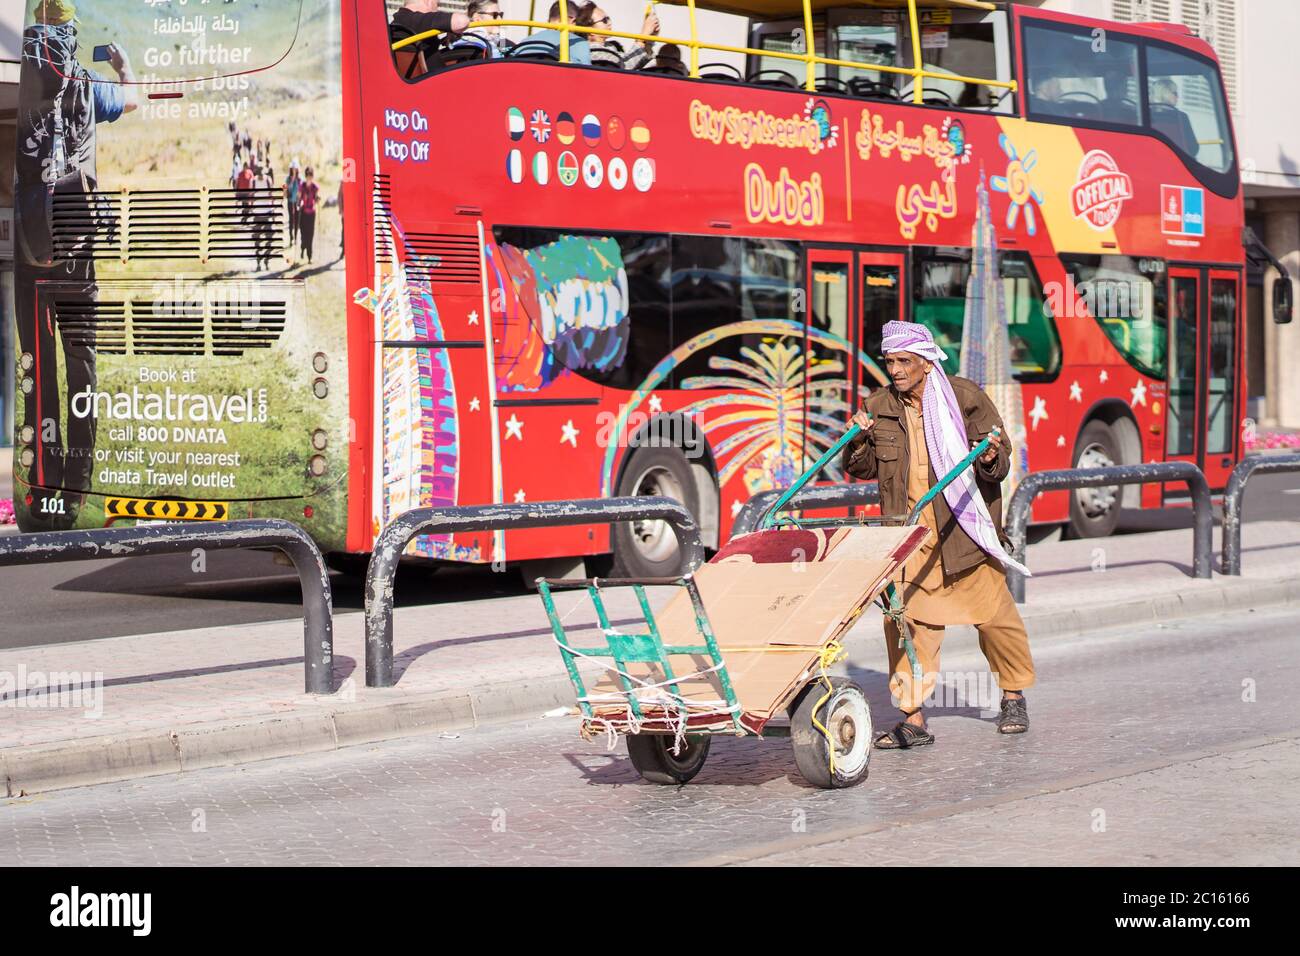 Dubai / United Arab Emirates - February 1, 2020: Immigrant Pakistani worker carrying cart with red tourist bus hop on hop off city sigthseeing behind him Stock Photo